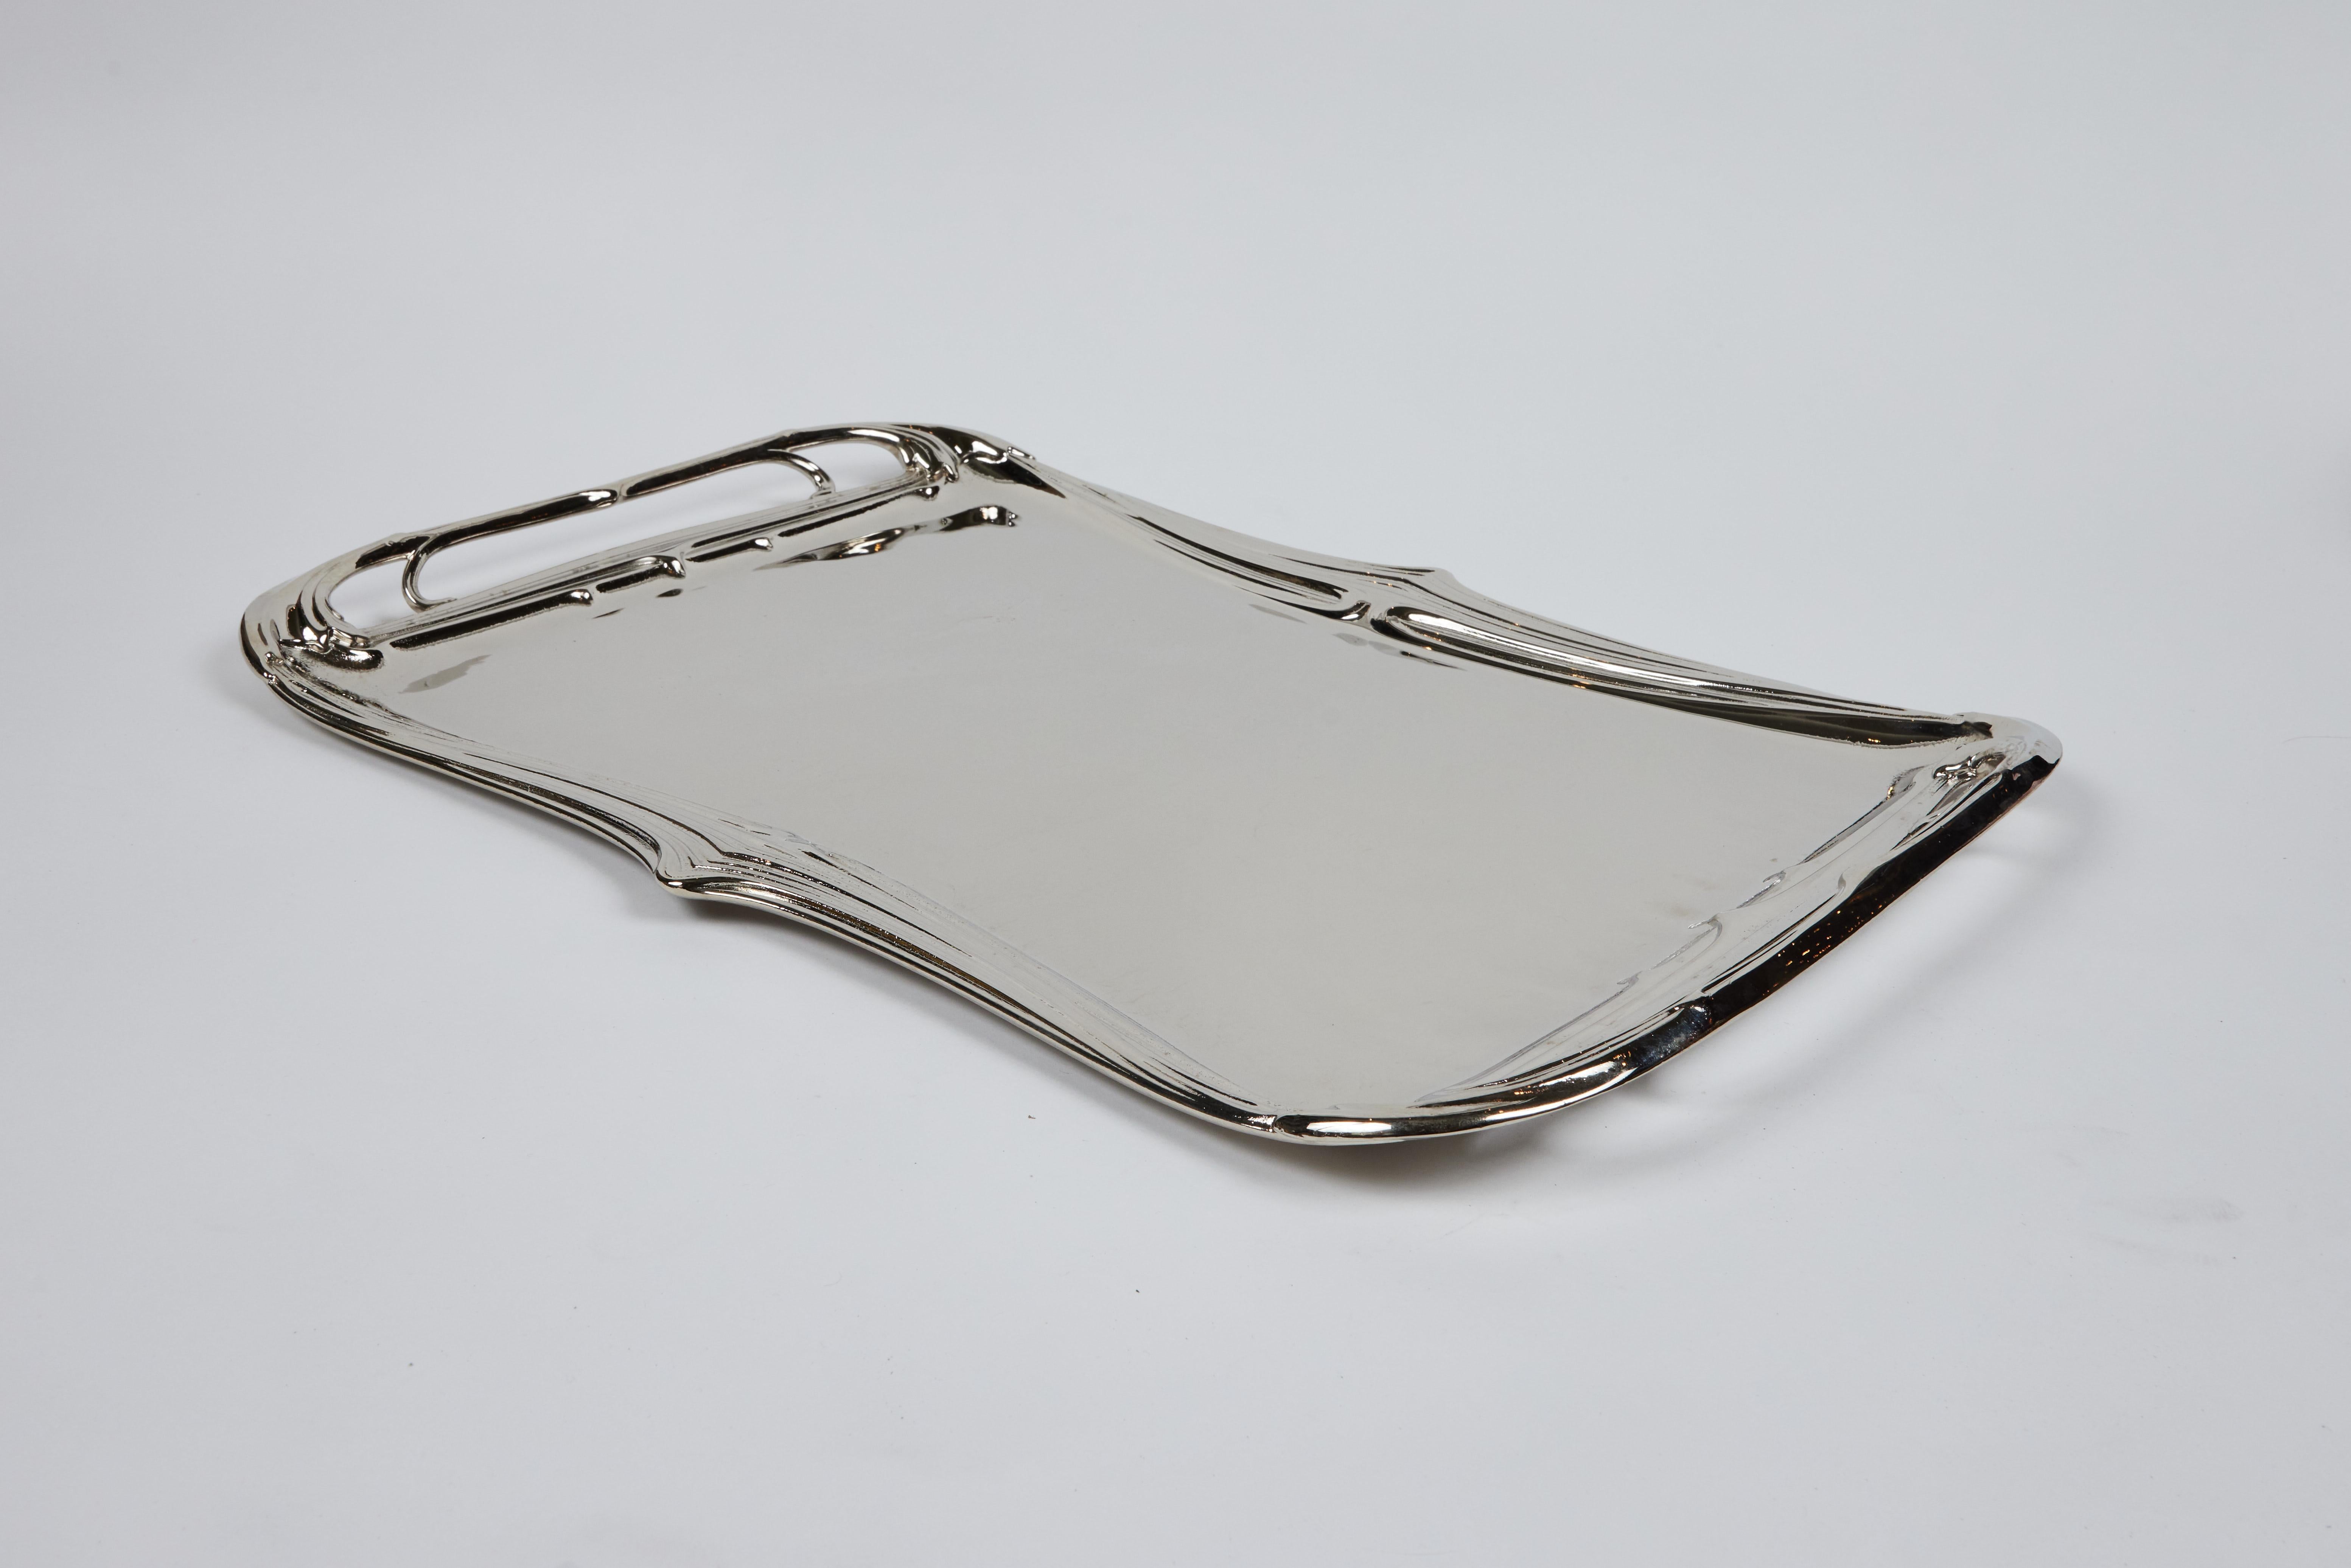 Stainless Steel Vintage WMF Art Nouveau Style Serving Tray